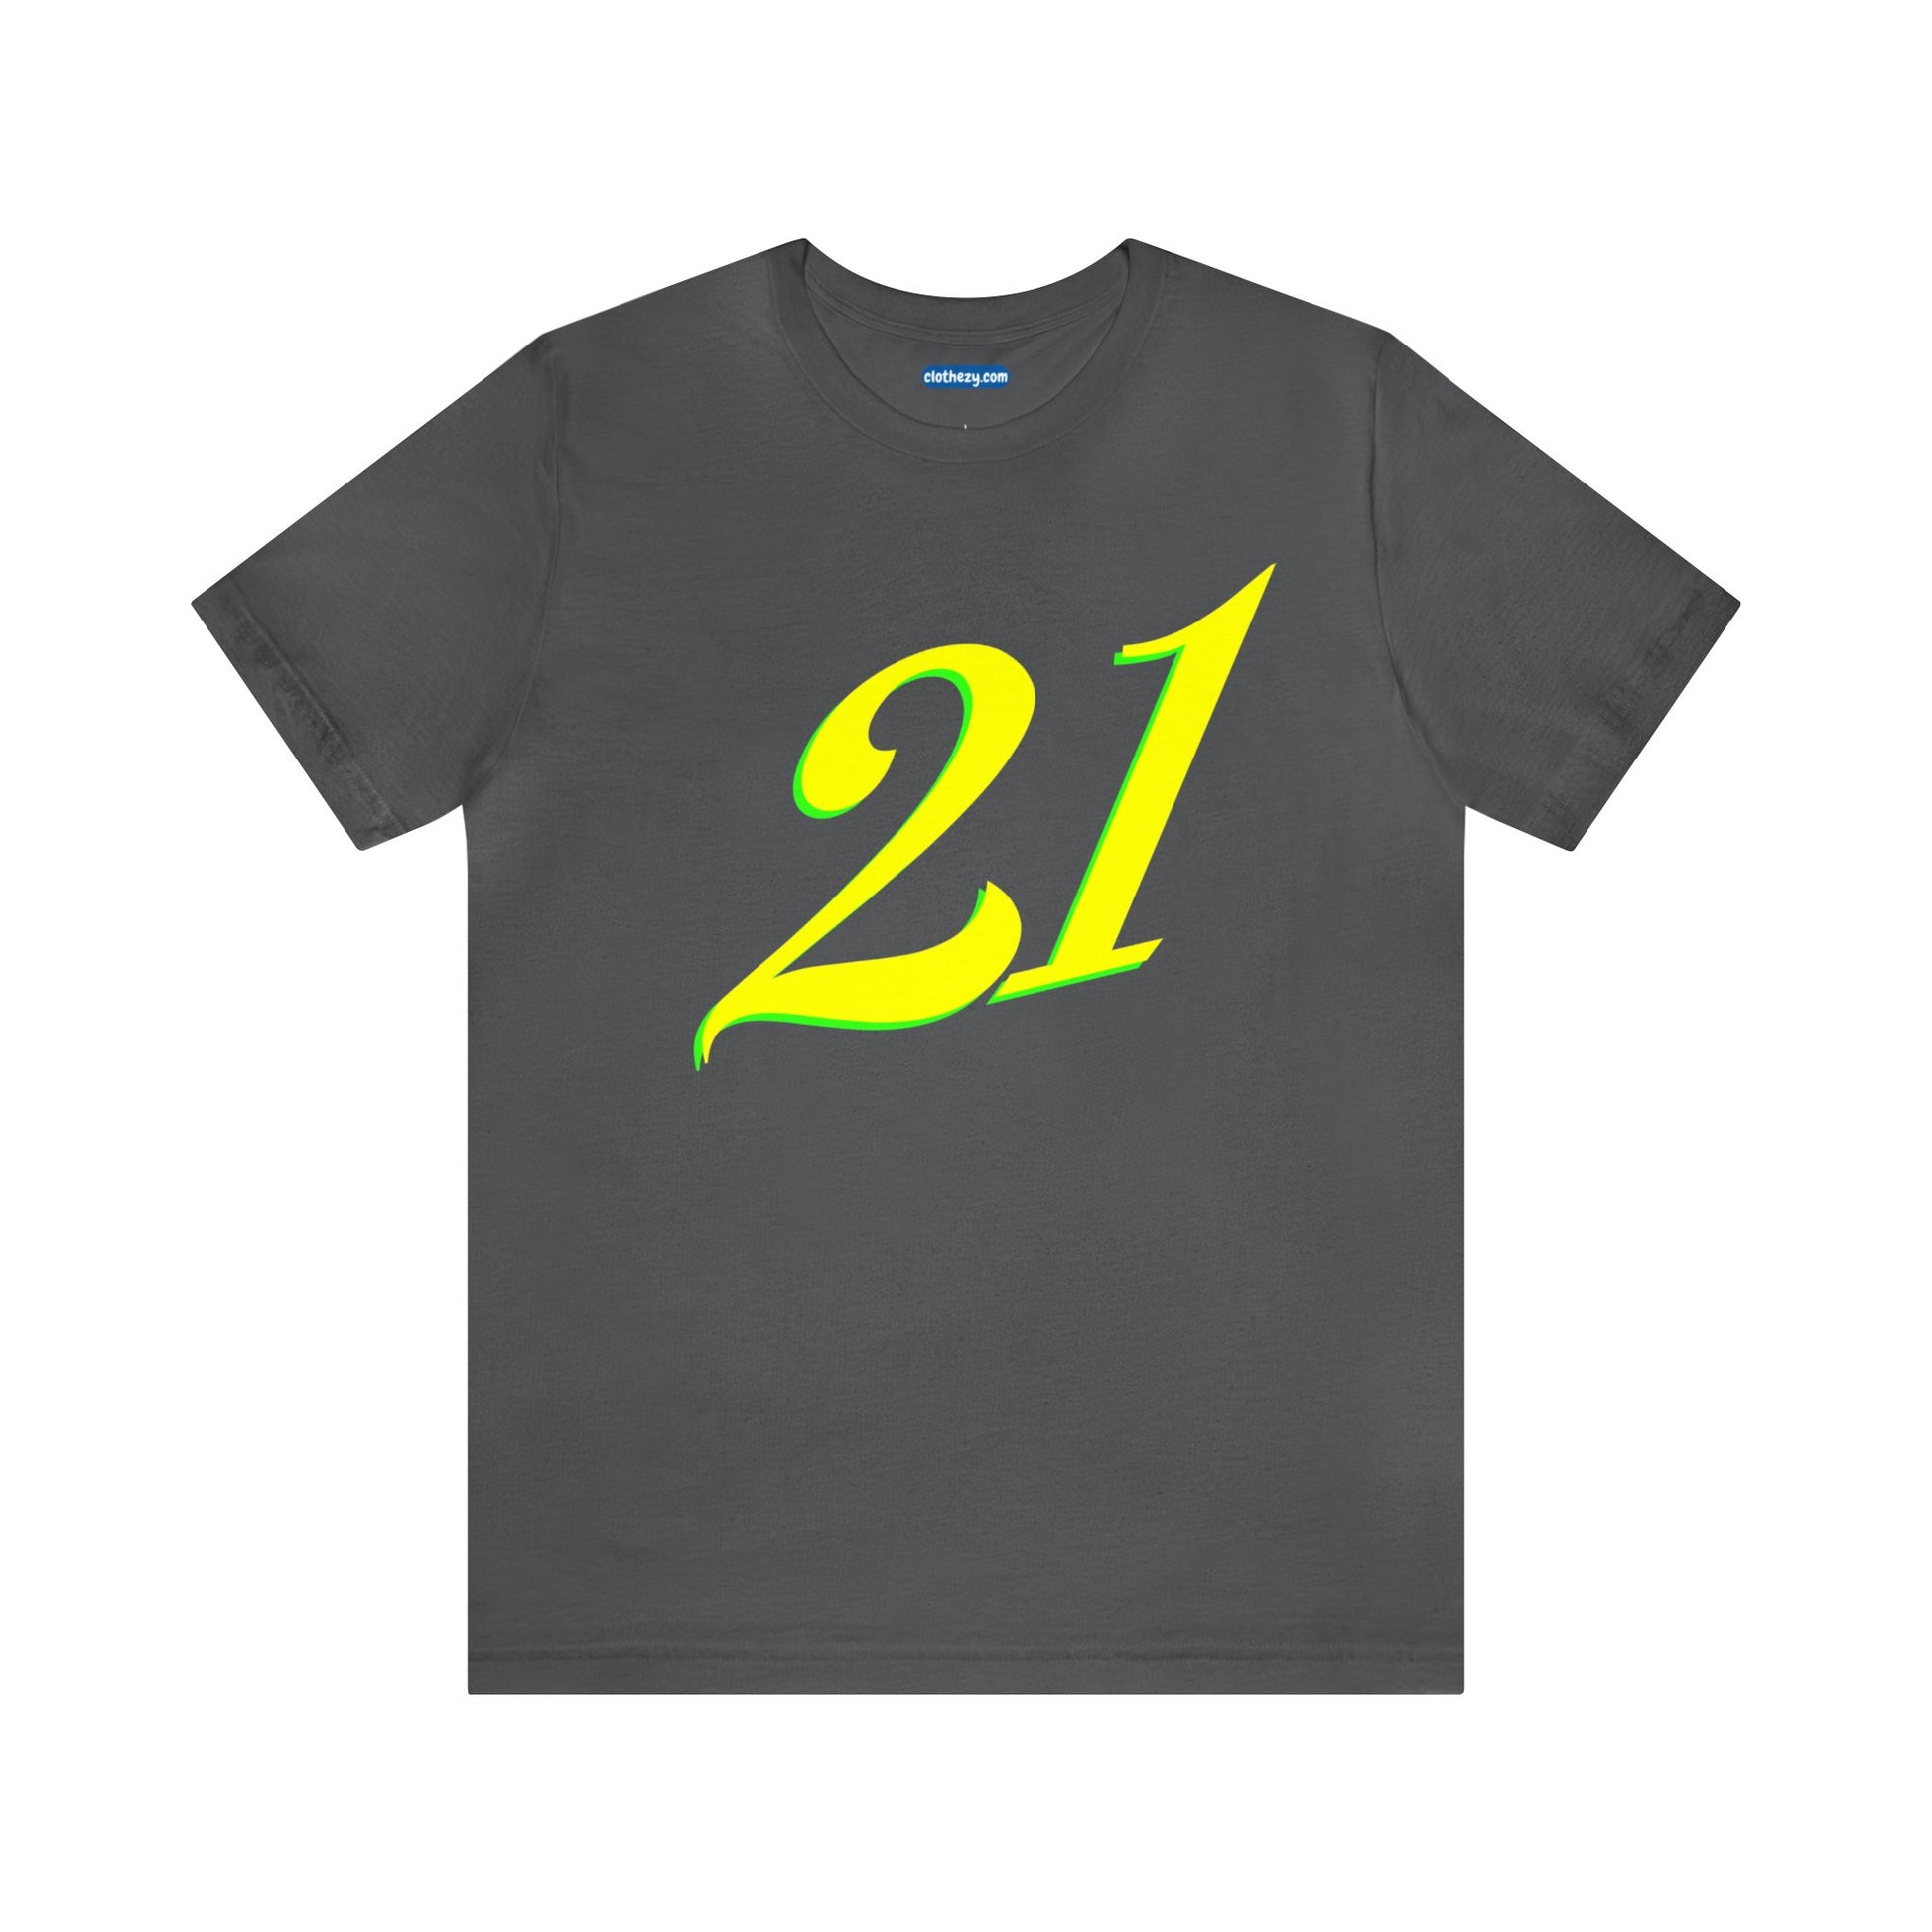 Number 21 Design - Soft Cotton Tee for birthdays and celebrations, Gift for friends and family, Multiple Options by clothezy.com in Black Size Small - Buy Now